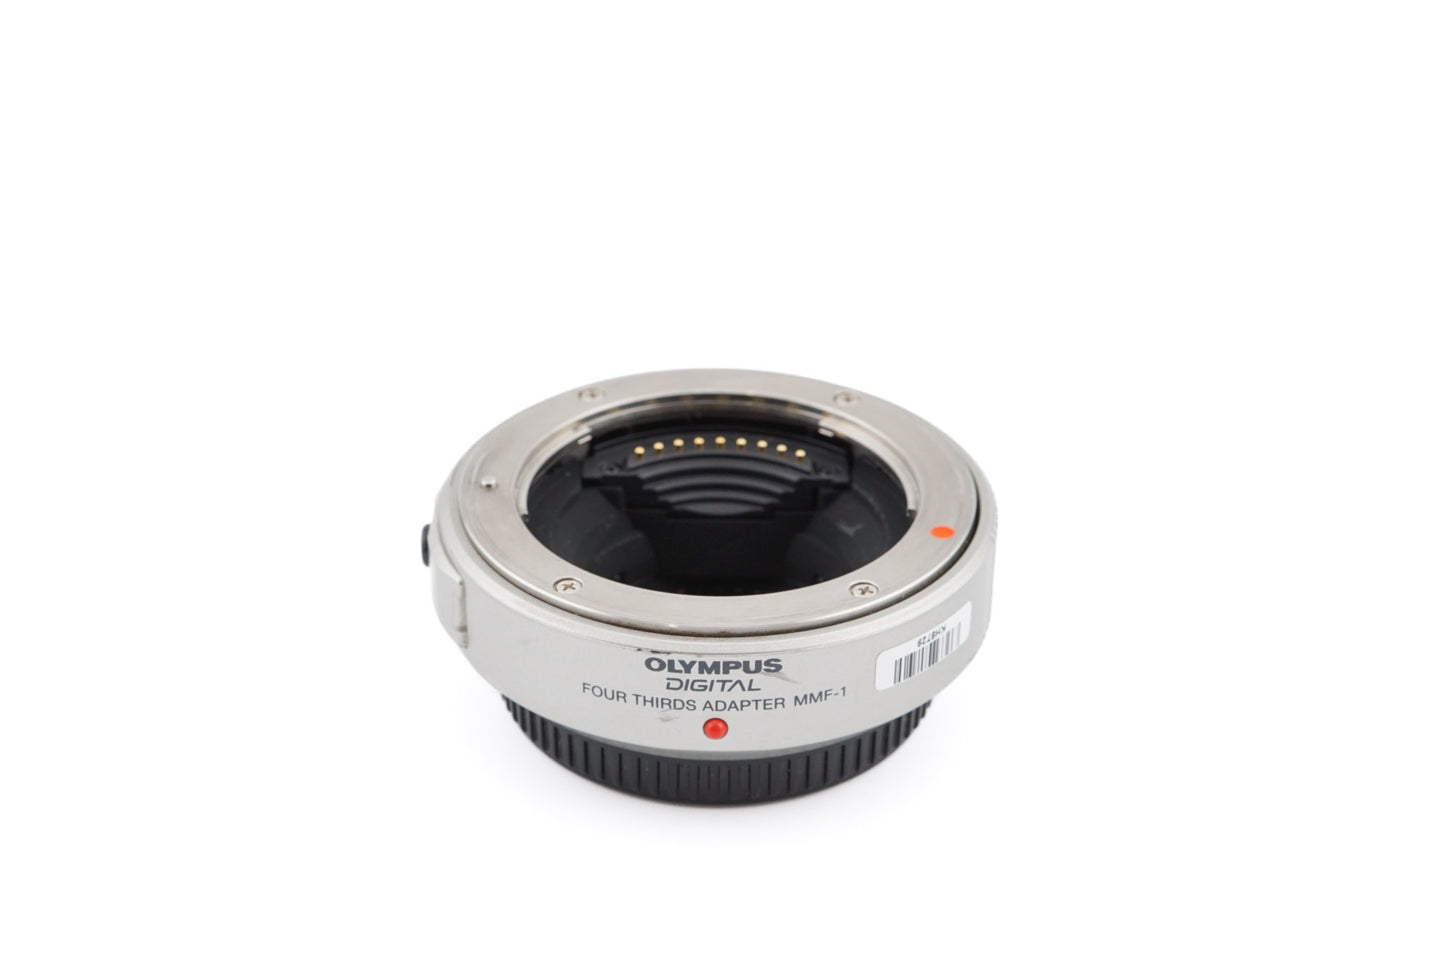 Olympus Four Thirds - M4/3 Adapter MMF-1 - Lens Adapter